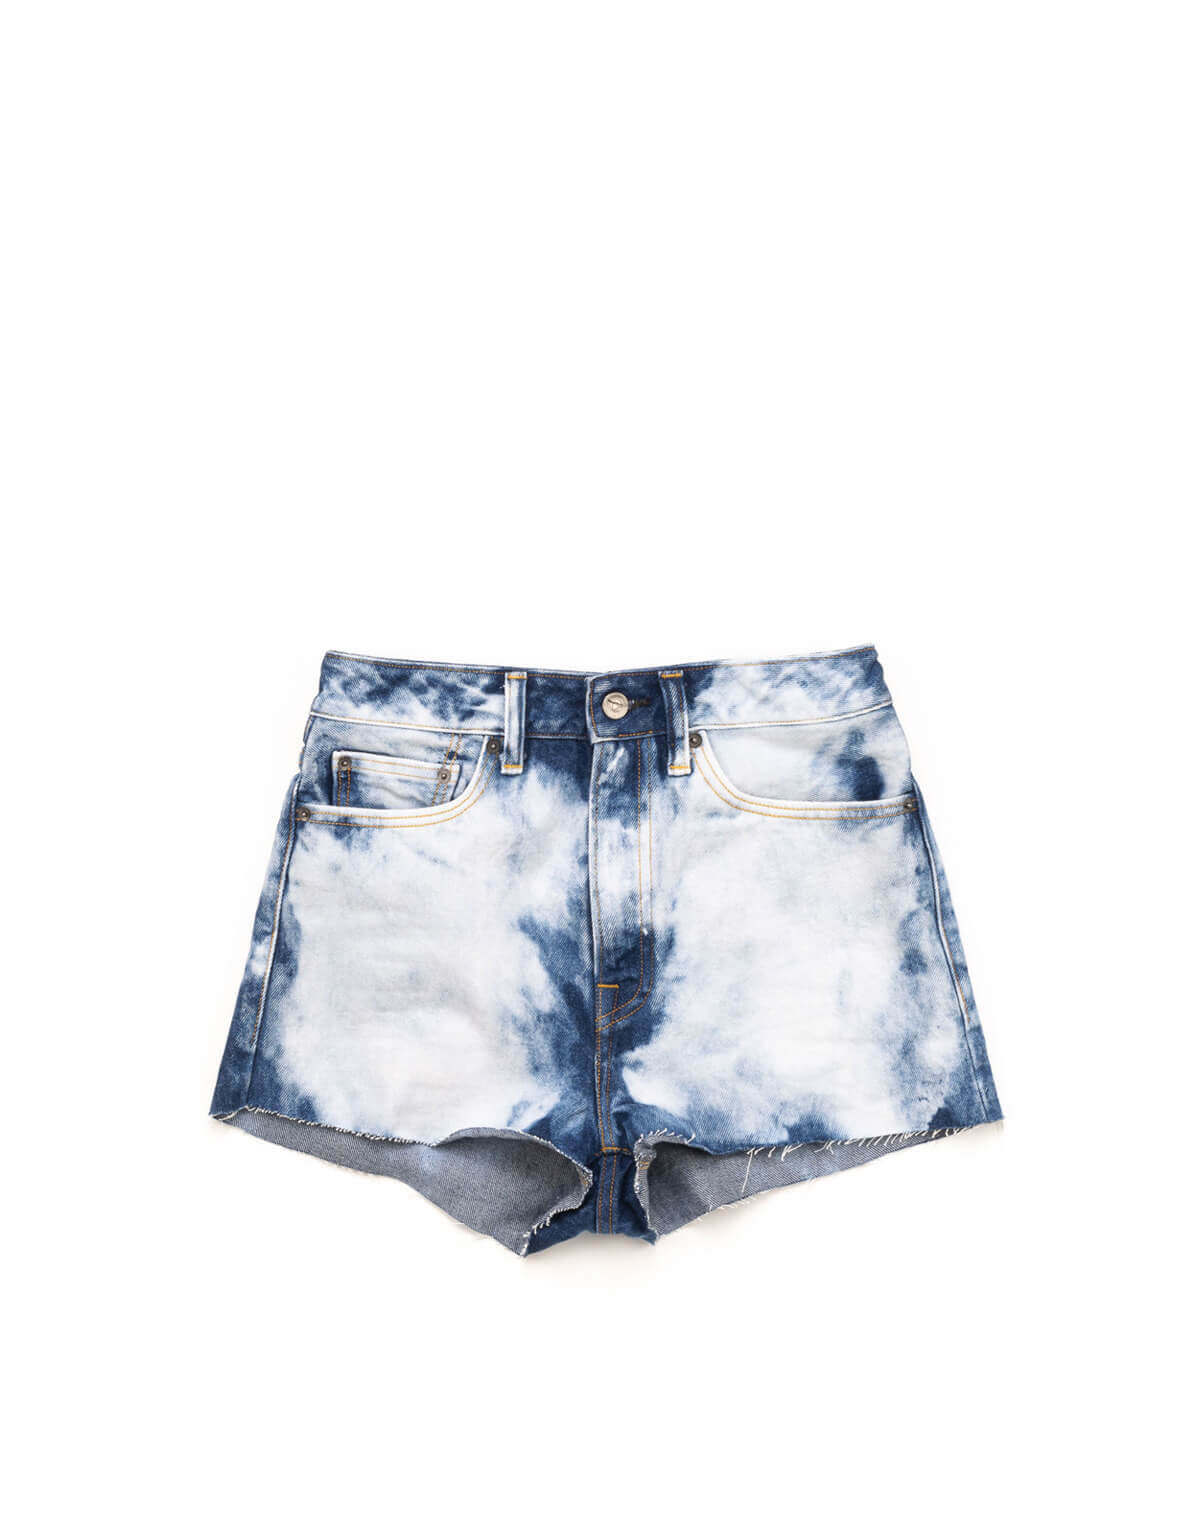 SD001 WASH 07 Tie dye denim 5 pockets shorts, zip and button closure. 100% cotton. Made in Italy. HTC LOS ANGELES